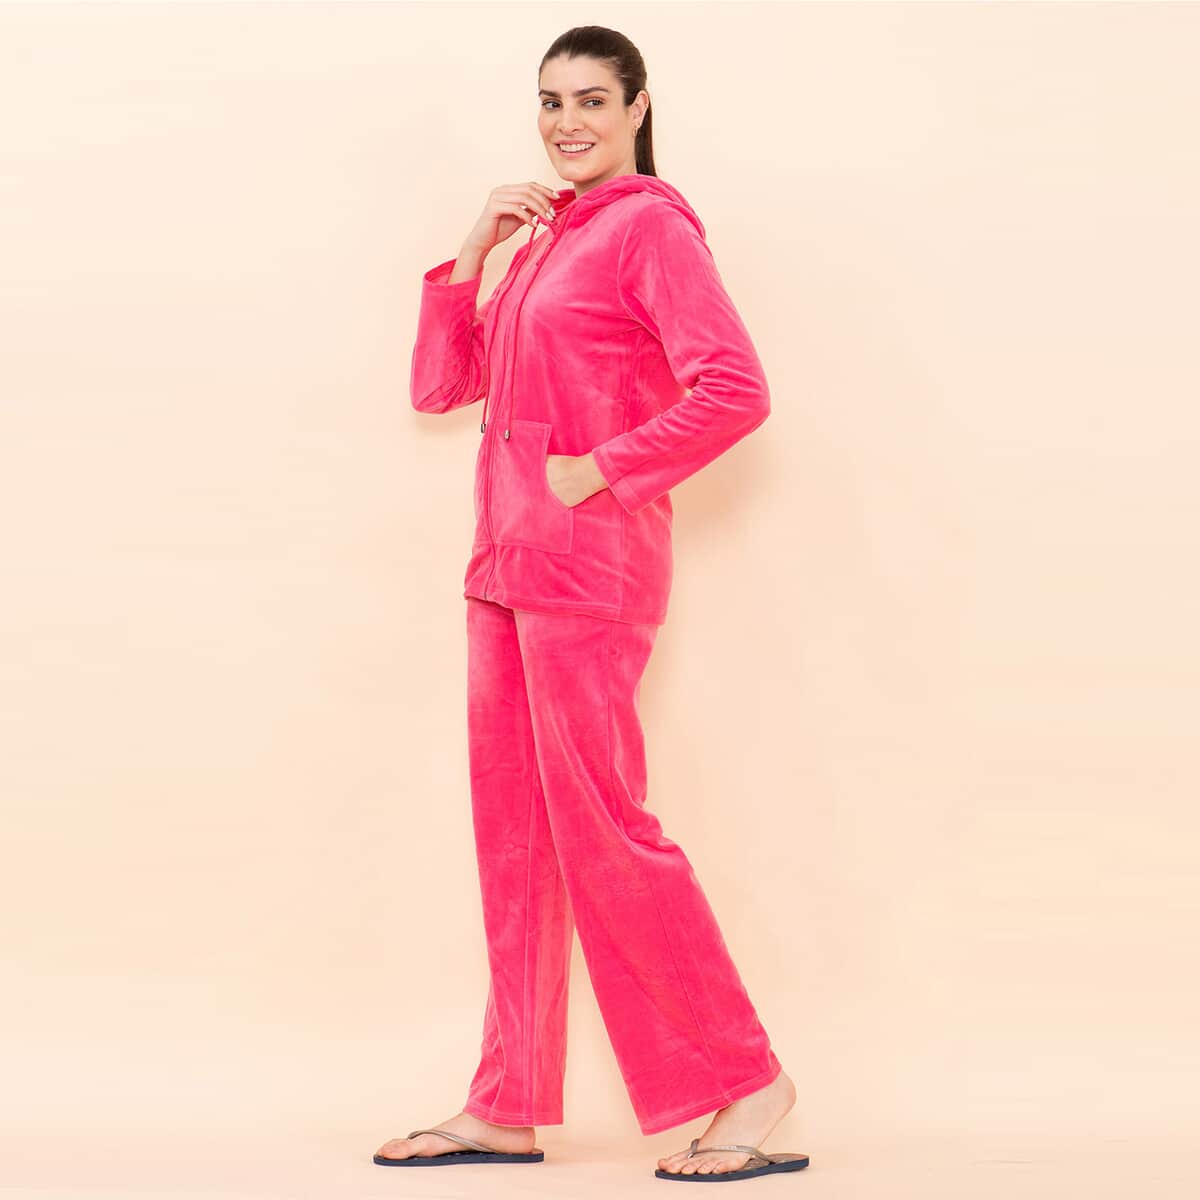 Tamsy LUX Pink Velour Track Suit Set - XL image number 5